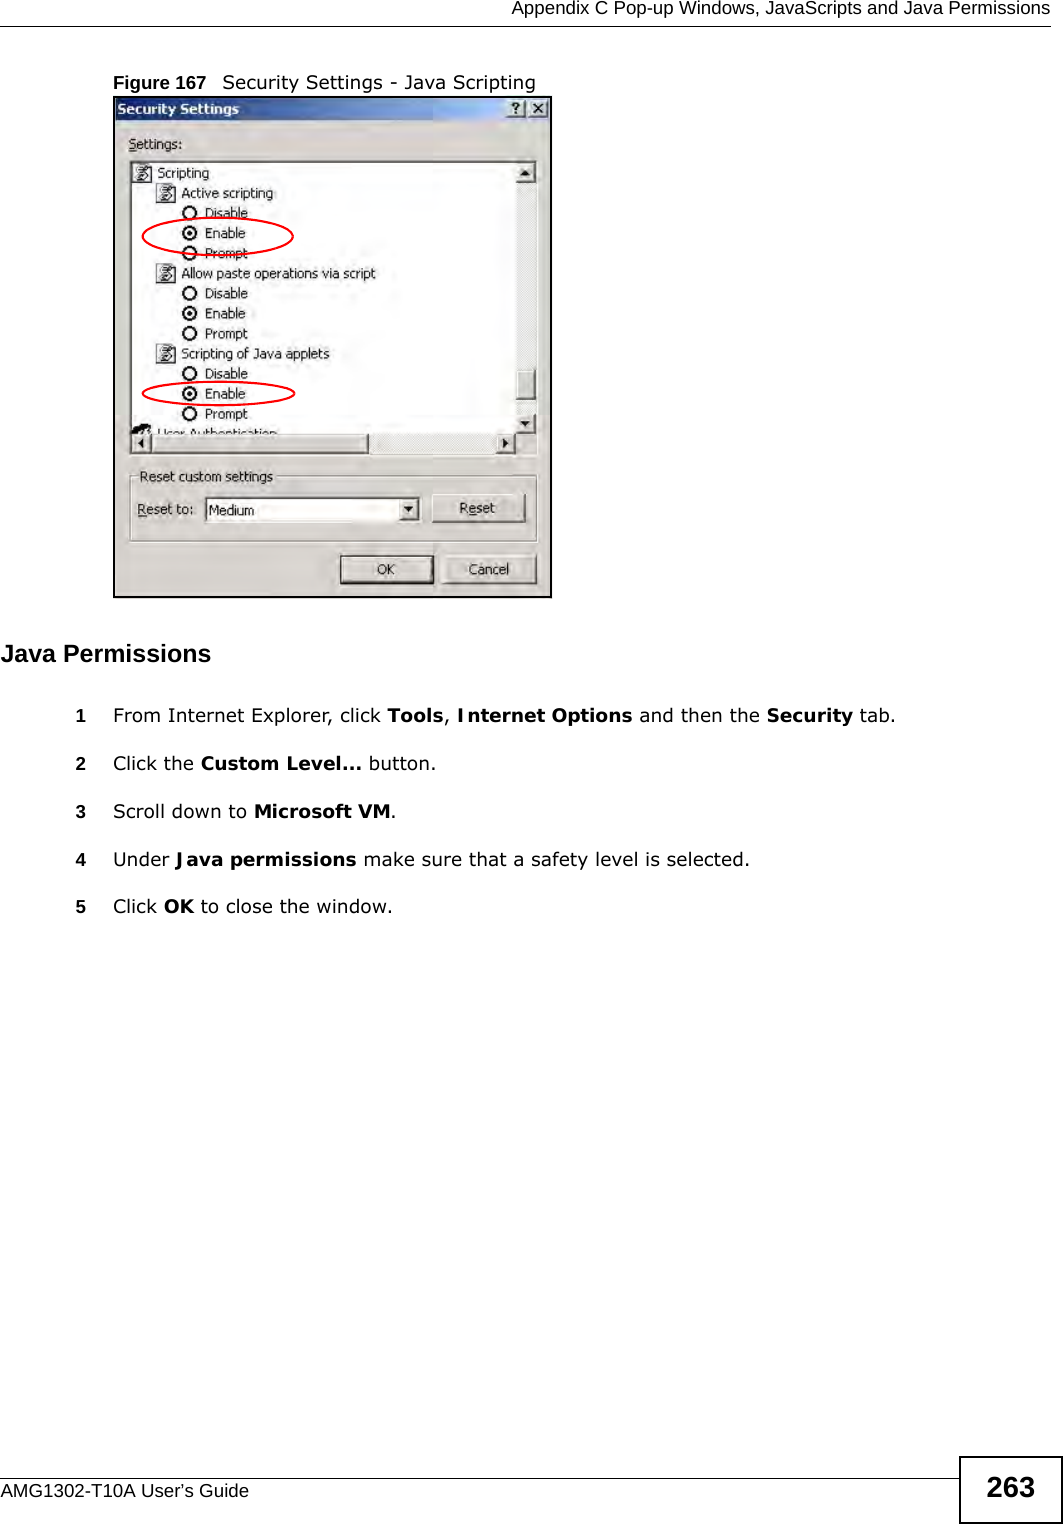  Appendix C Pop-up Windows, JavaScripts and Java PermissionsAMG1302-T10A User’s Guide 263Figure 167   Security Settings - Java ScriptingJava Permissions1From Internet Explorer, click Tools, Internet Options and then the Security tab. 2Click the Custom Level... button. 3Scroll down to Microsoft VM. 4Under Java permissions make sure that a safety level is selected.5Click OK to close the window.